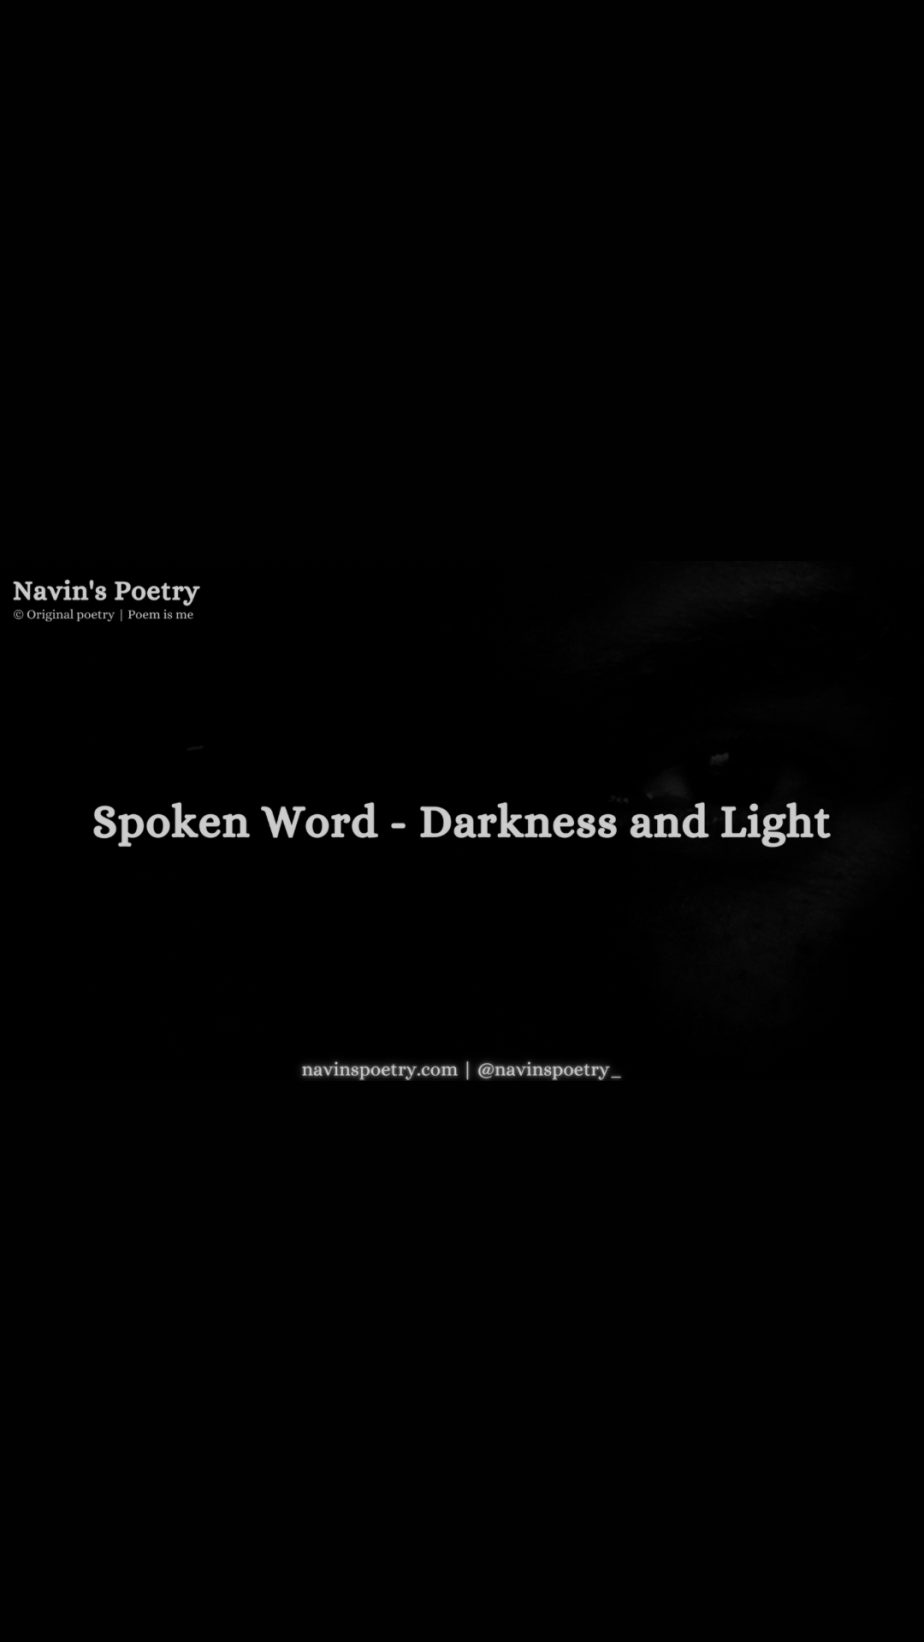 Spoken Word – Darkness and Light (YouTube channel)